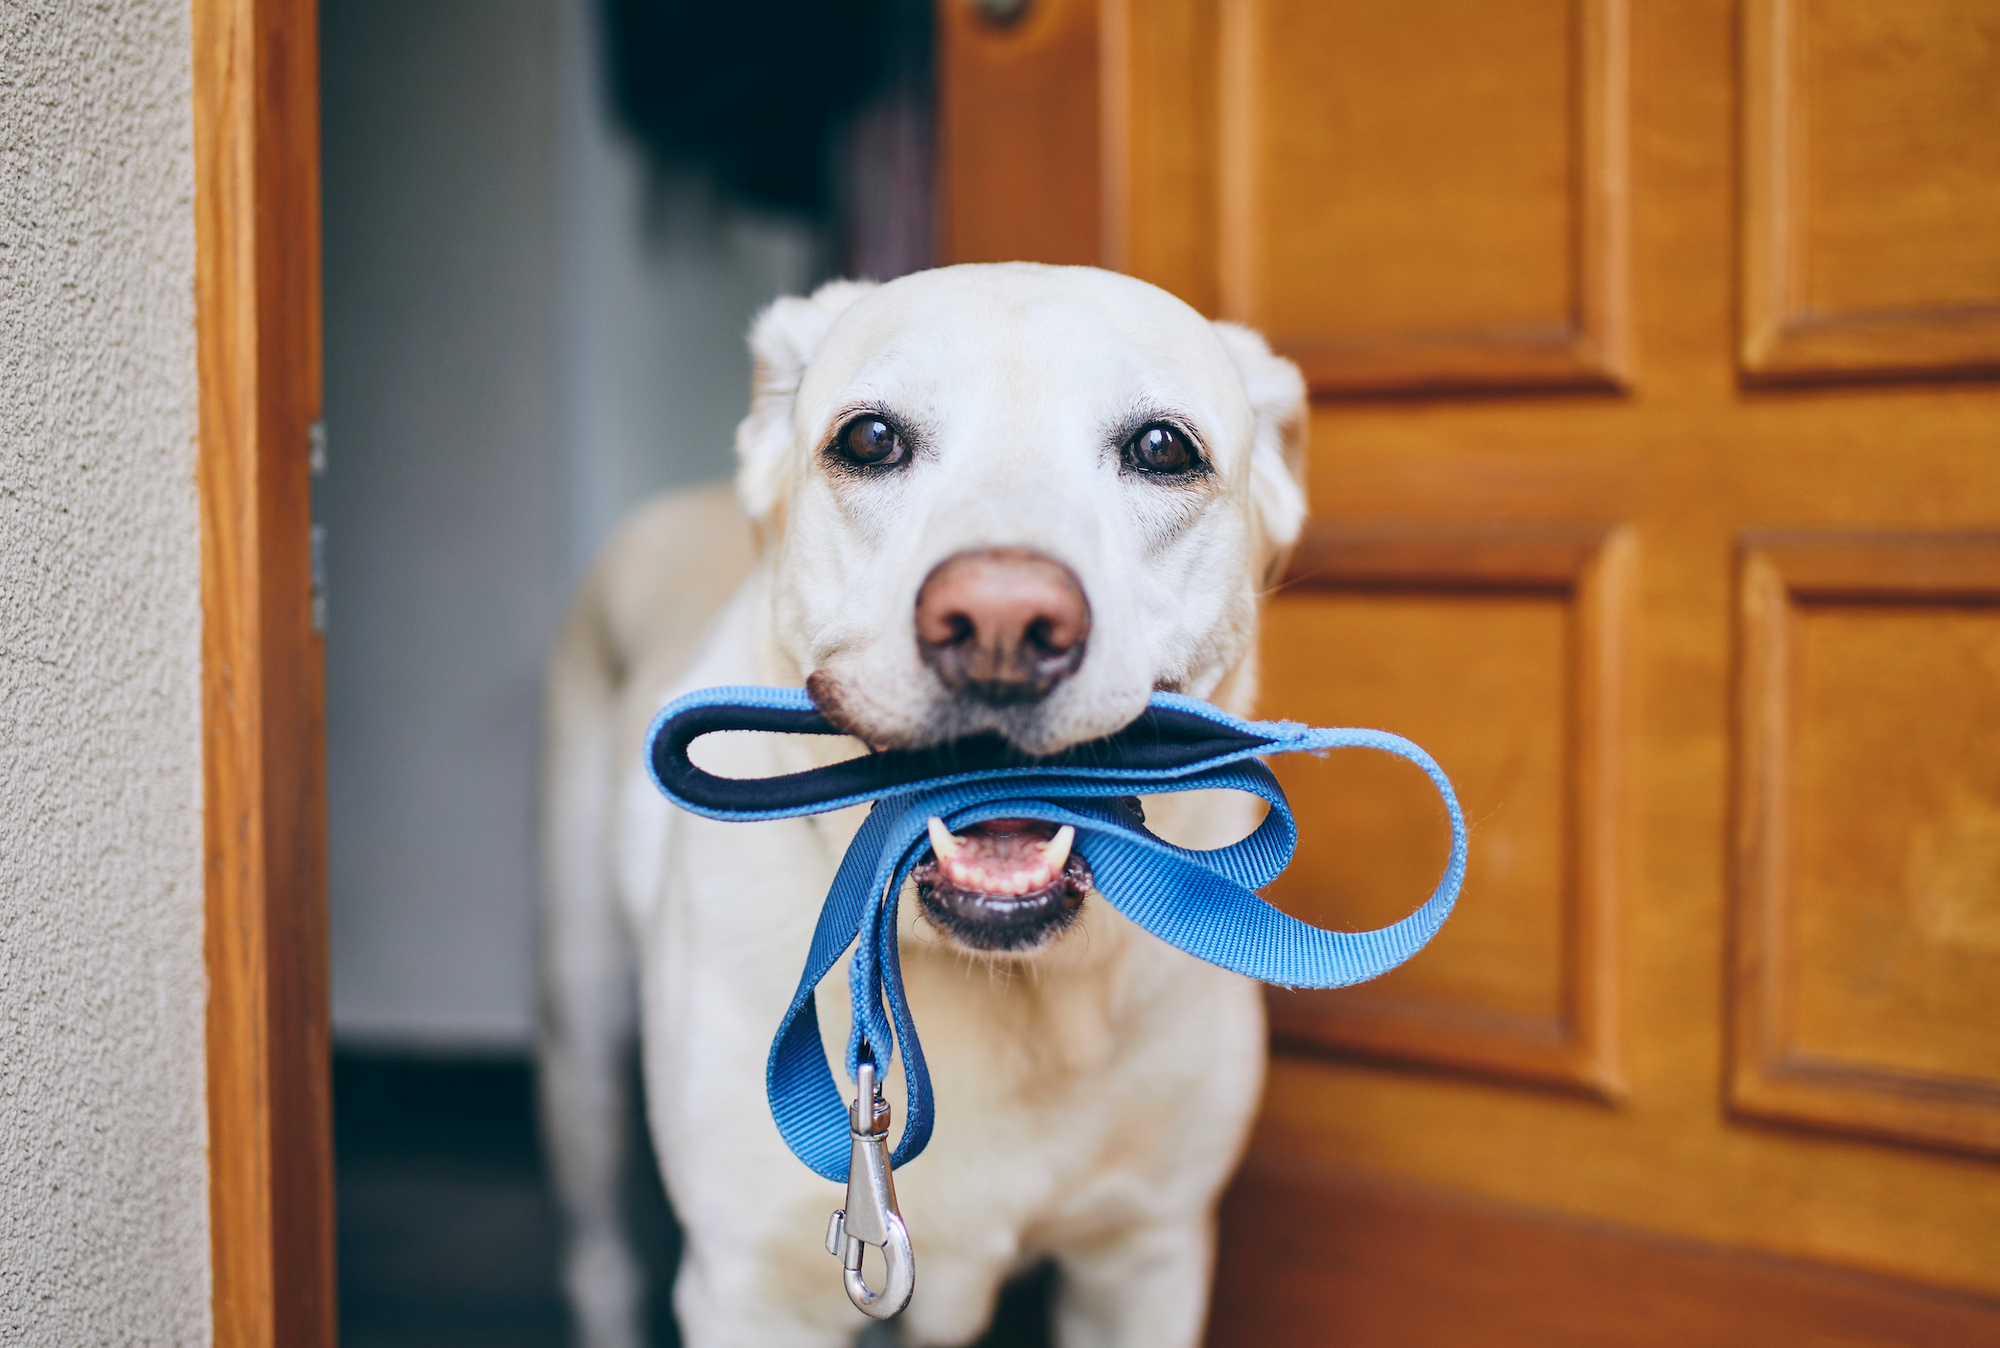 A dog holding a leash in its mouth, close-up view.